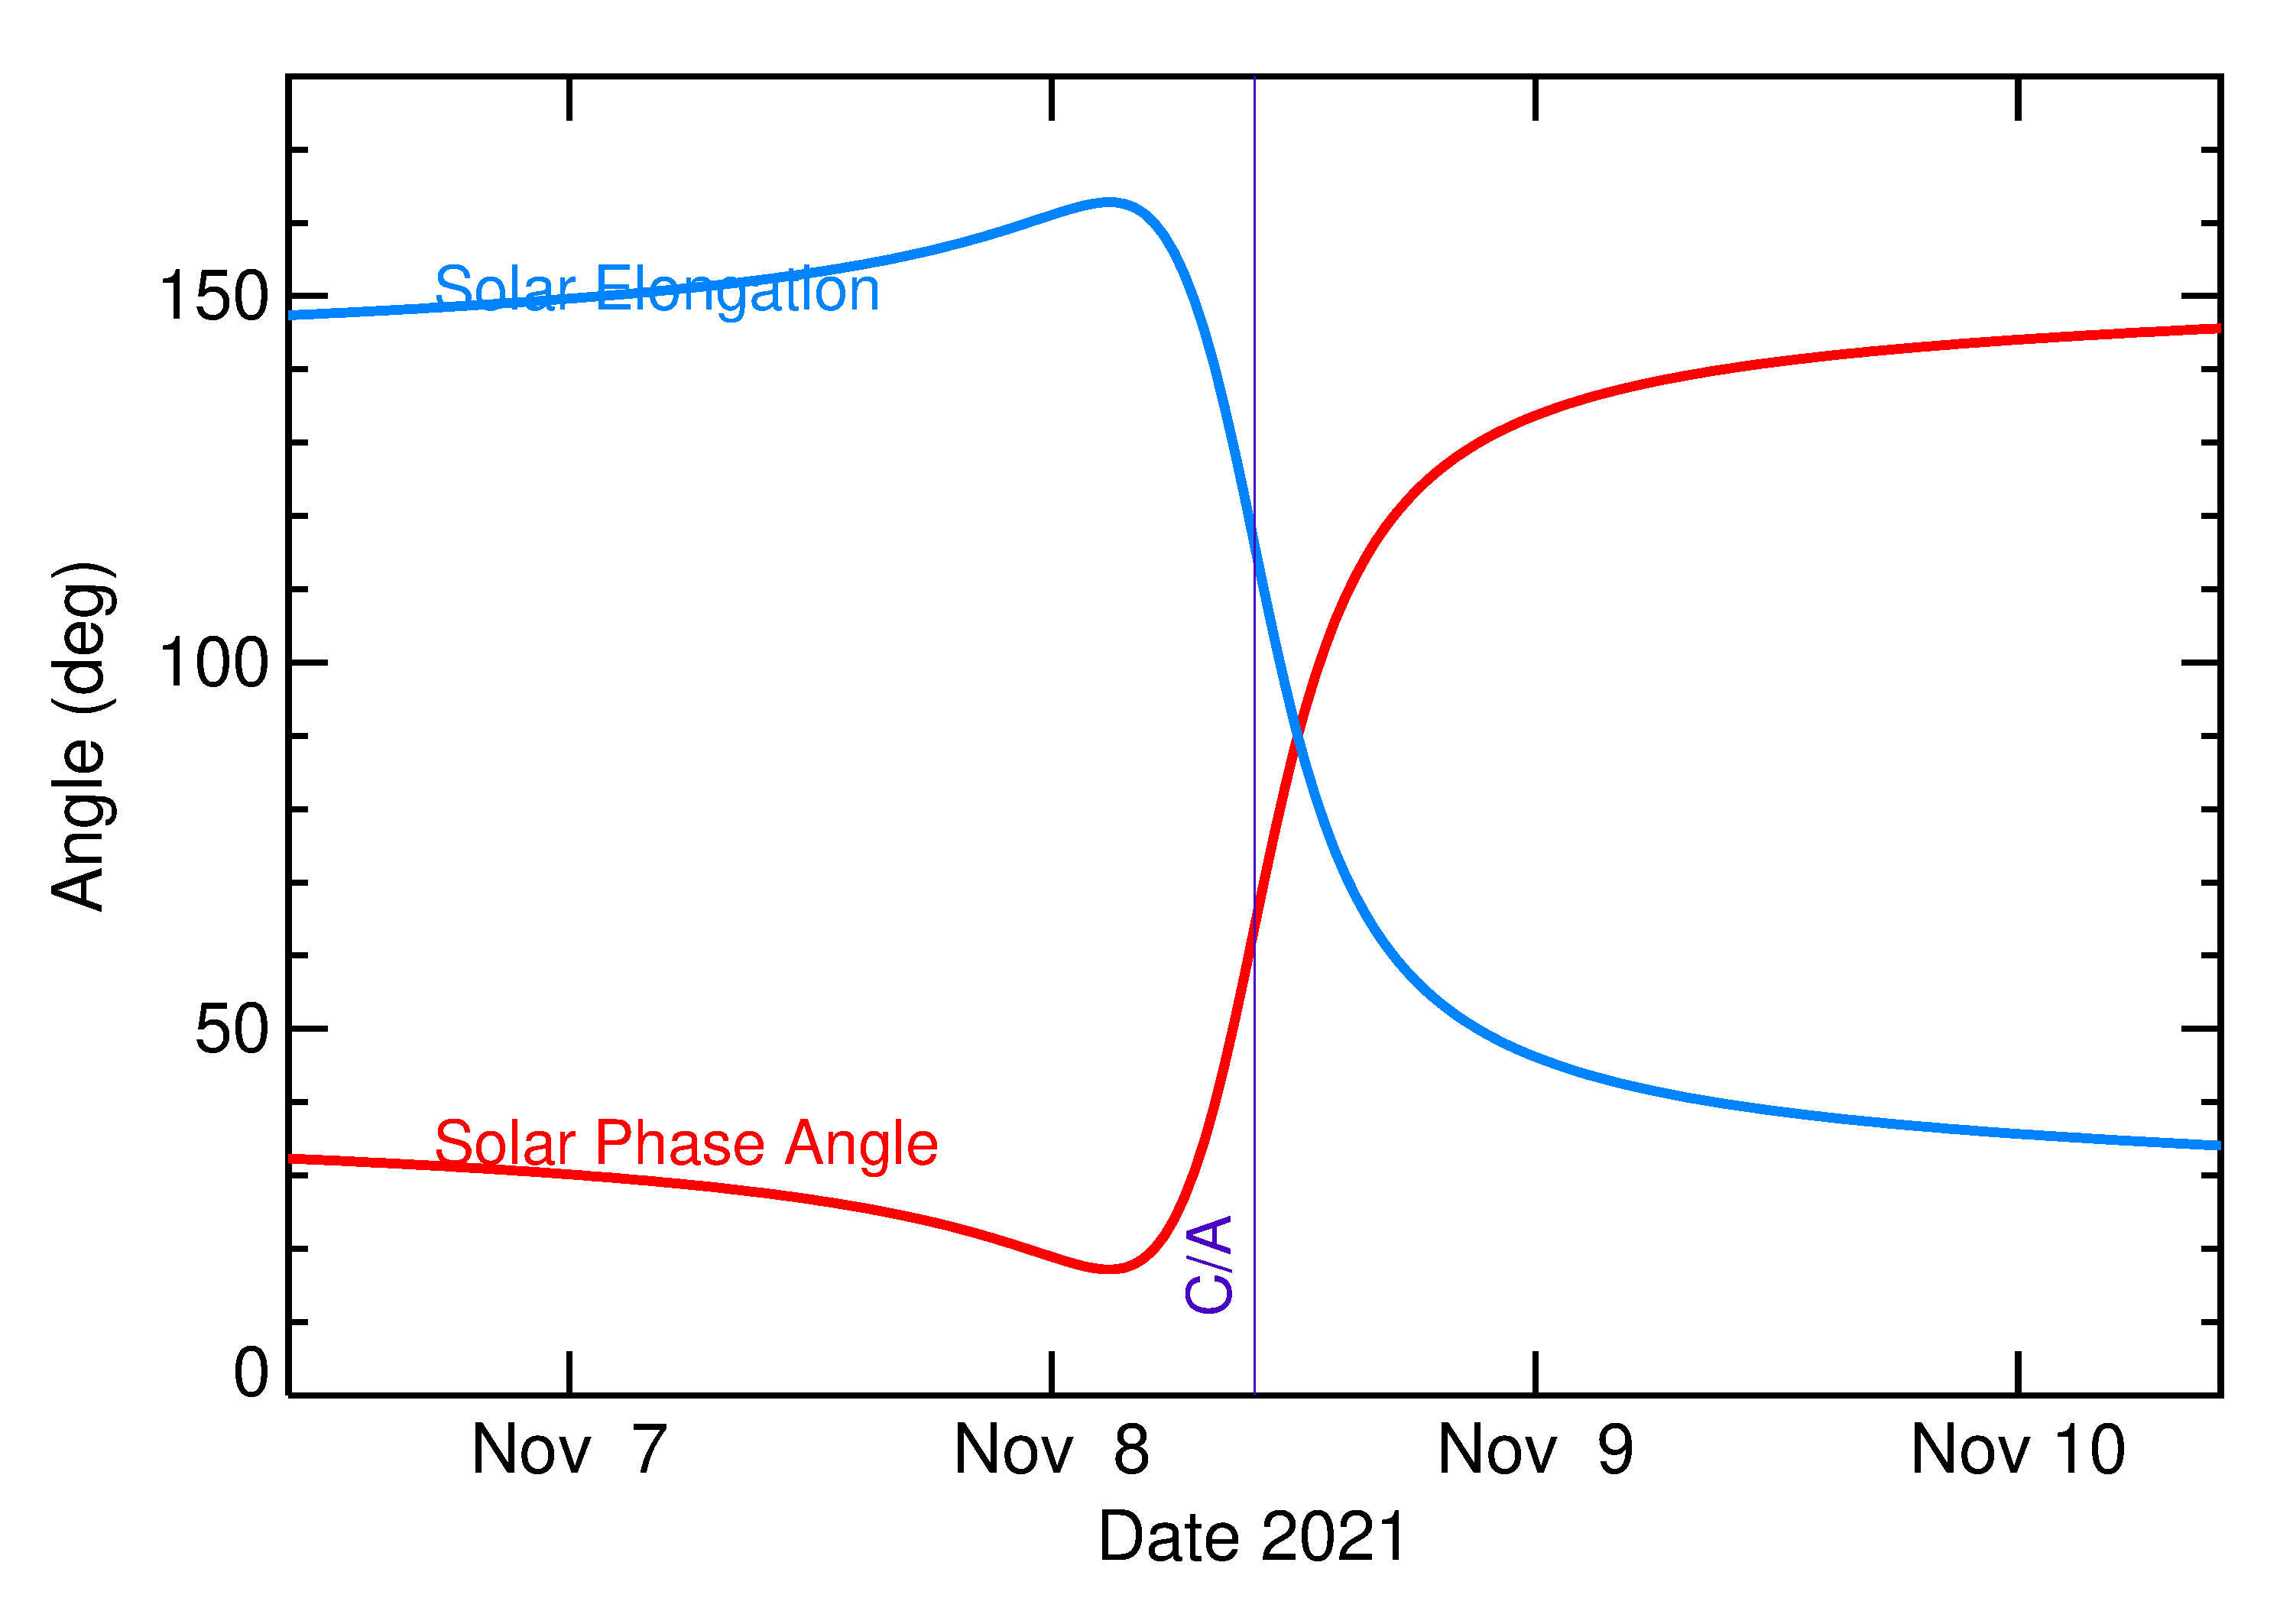 Solar Elongation and Solar Phase Angle of 2021 VN3 in the days around closest approach